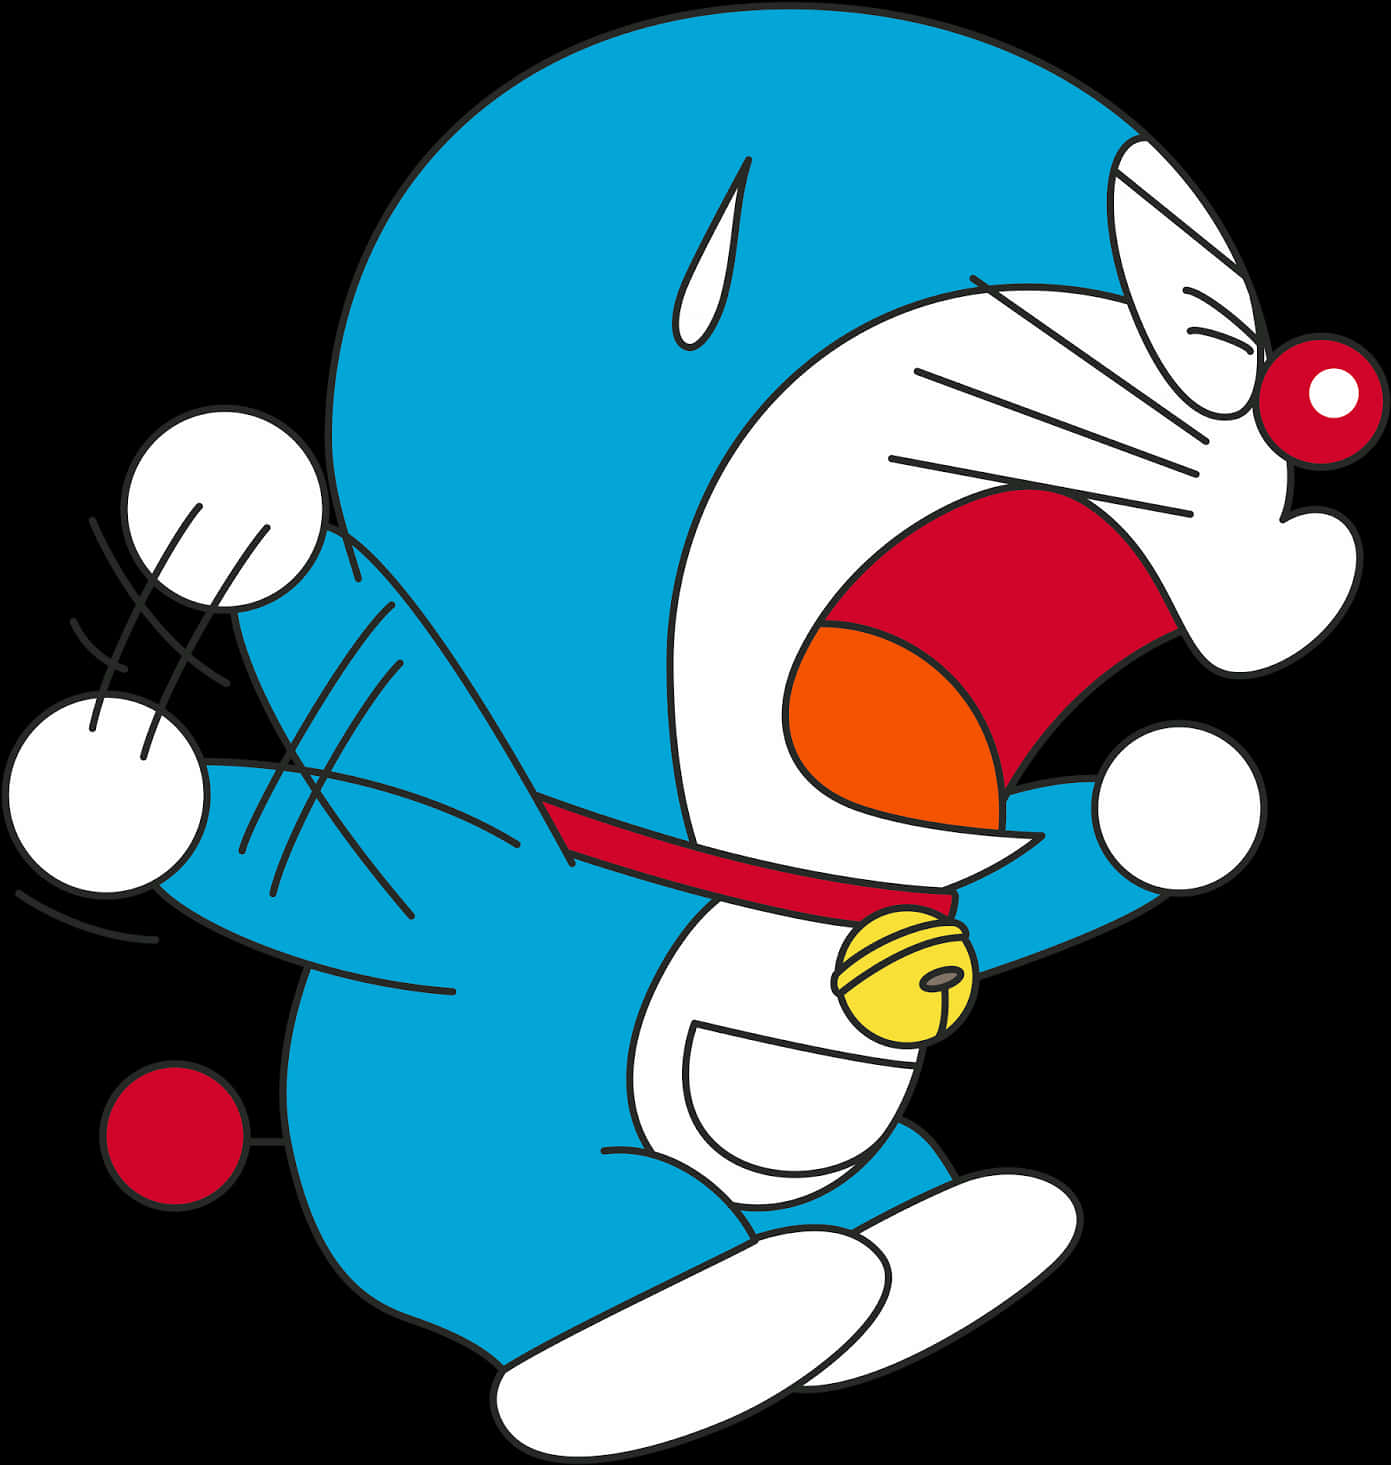 Cartoon Character With A Red Nose And A Blue Cat With A Red Nose And A Yellow Bell PNG